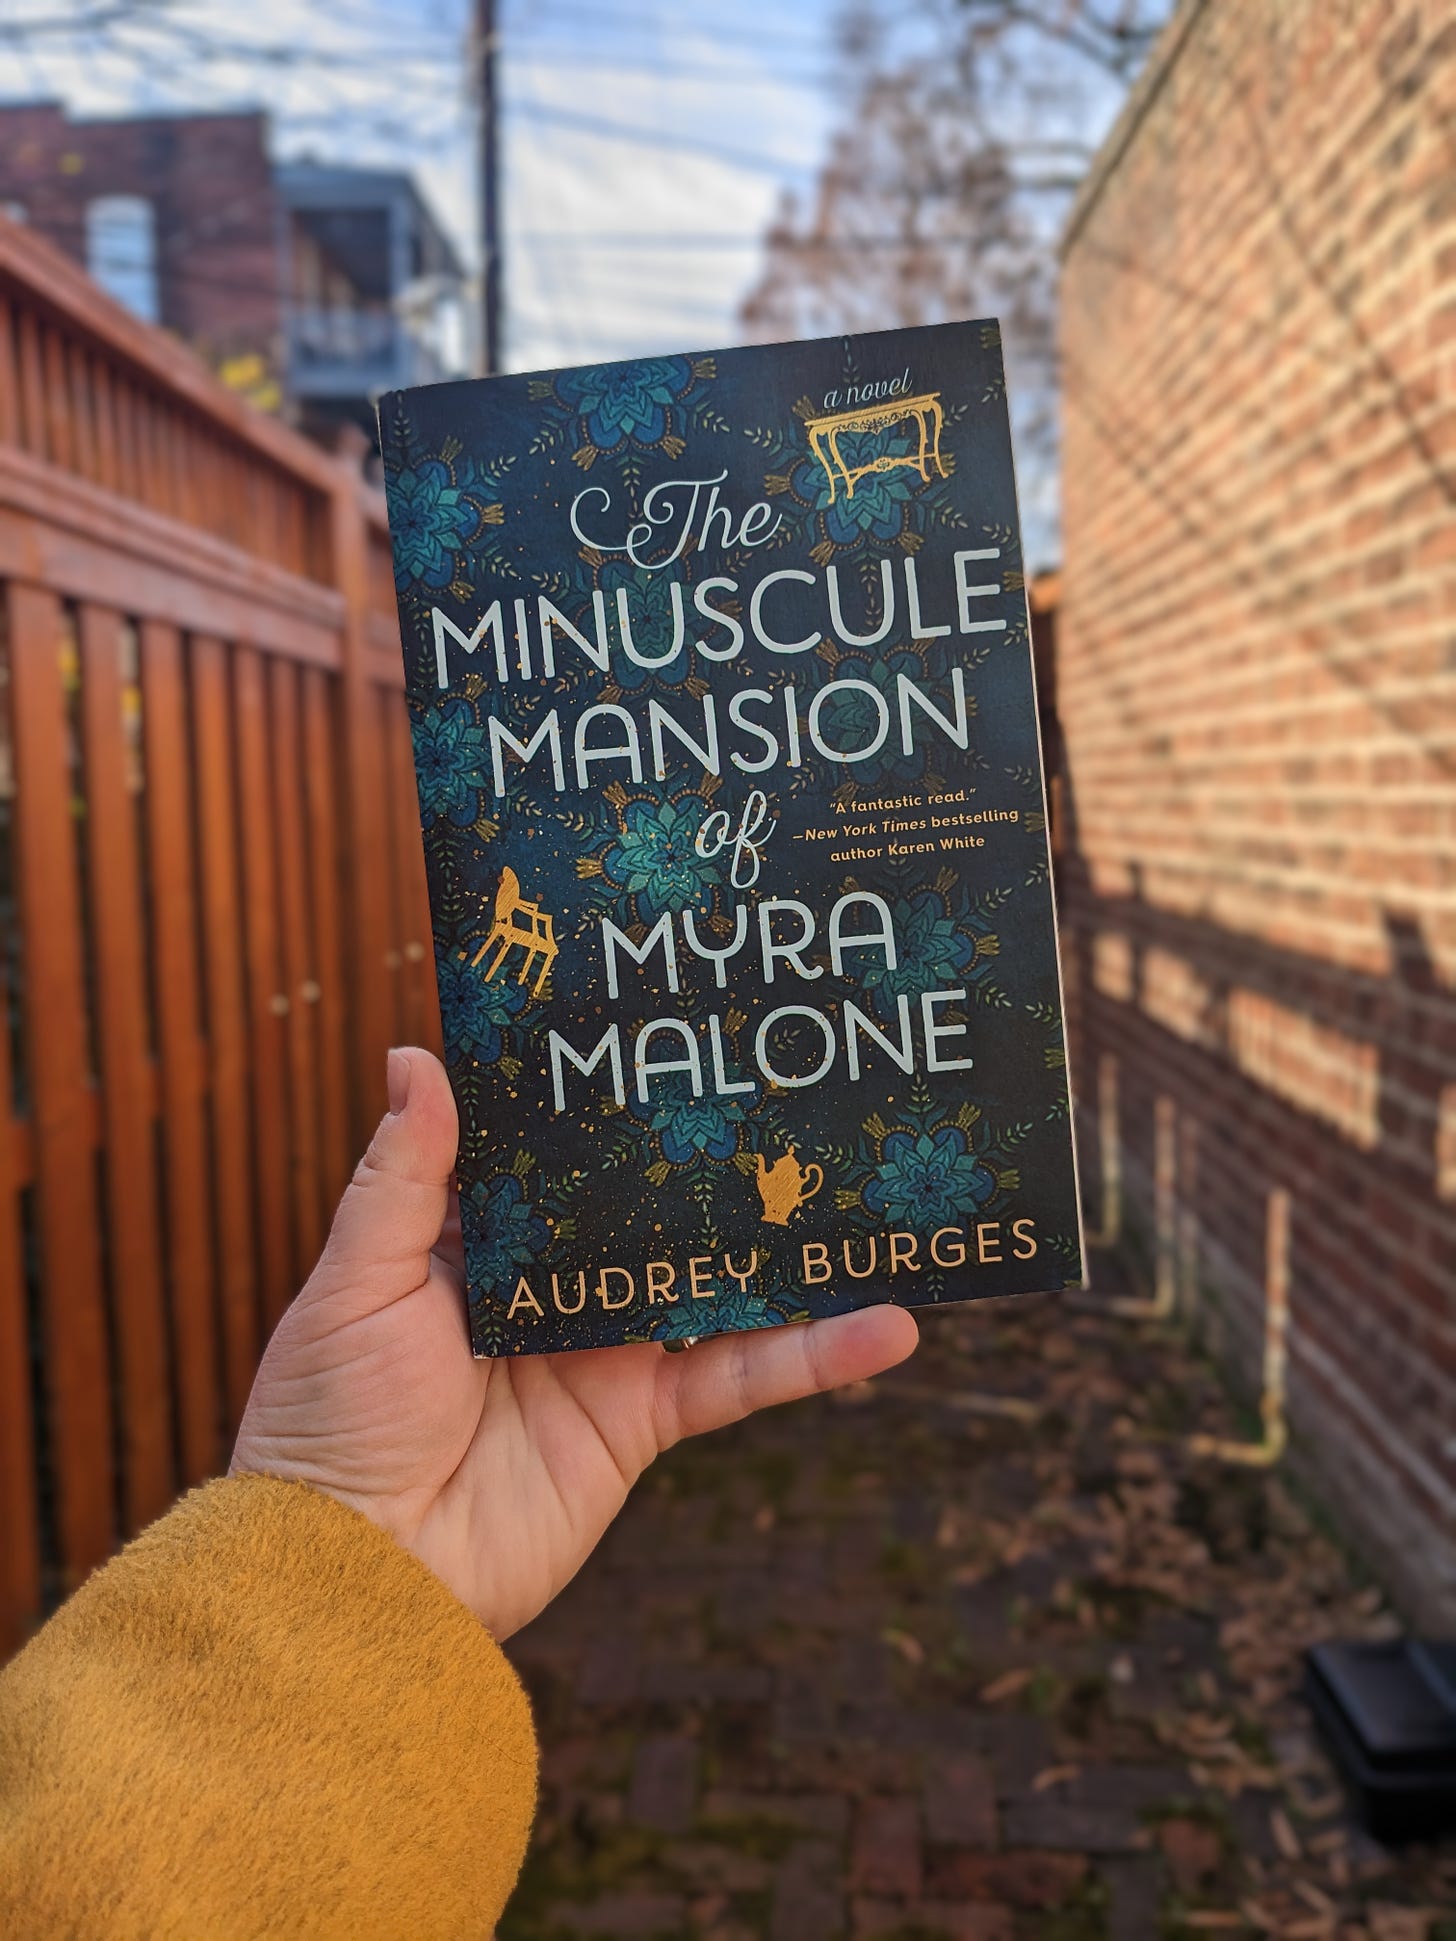 photo of Sarah's hand holding a copy of The Minuscule Mansion of Myra Malone by Audrey Burges in front of a brick wall and fence.